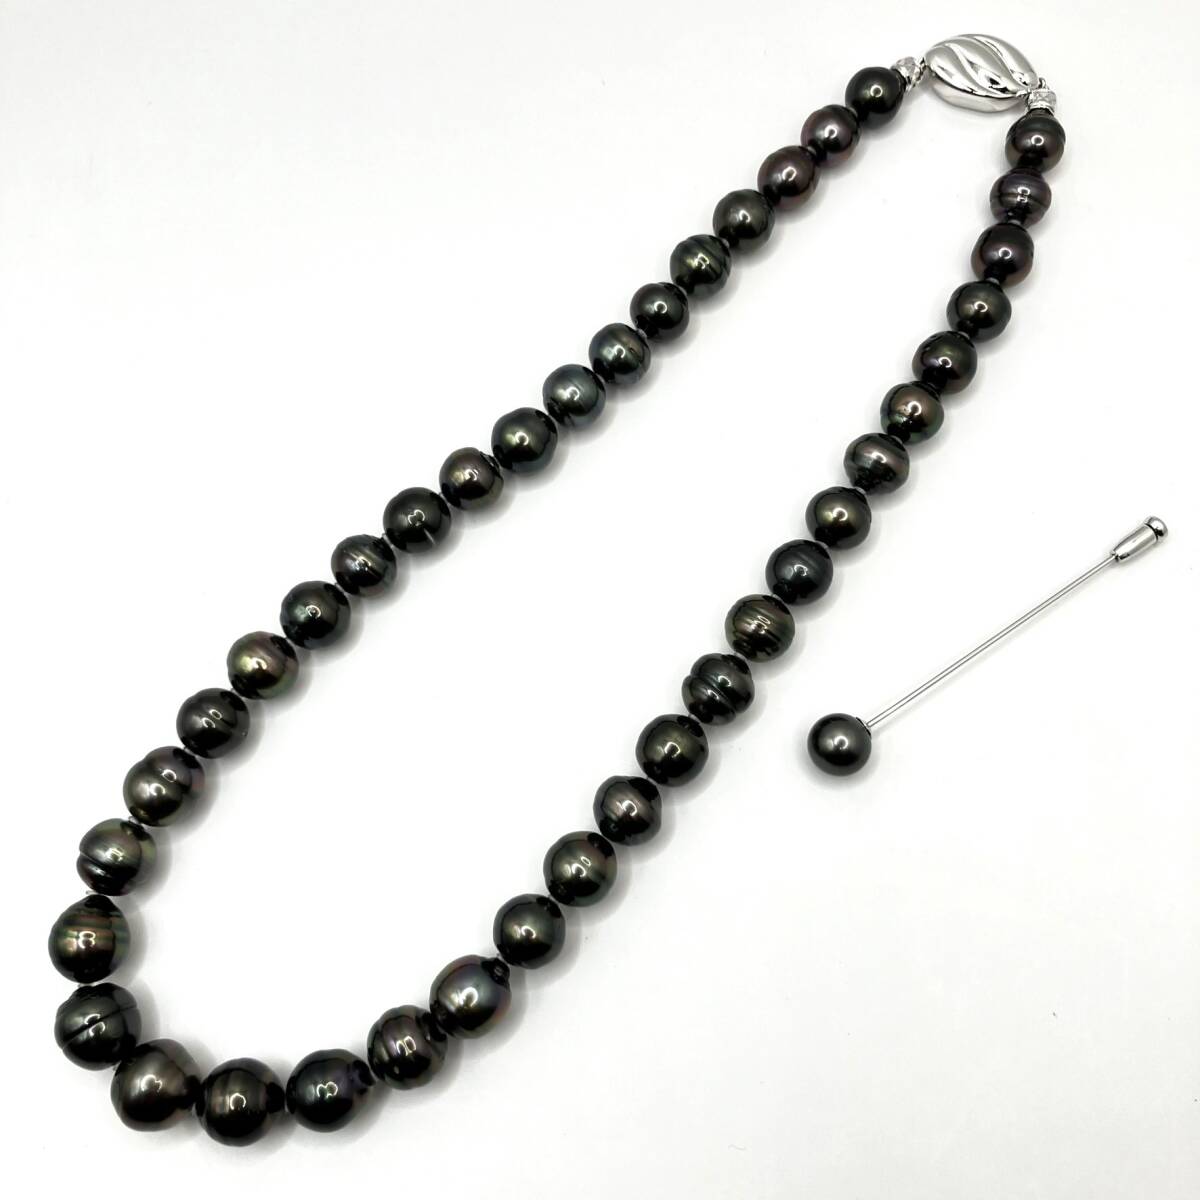 *1 jpy ~* free shipping!* large .* written guarantee & brooch & case attaching * south . Black Butterfly pearl 9-12.0mm total length 45cm 67.5g necklace pearl Black Butterfly 